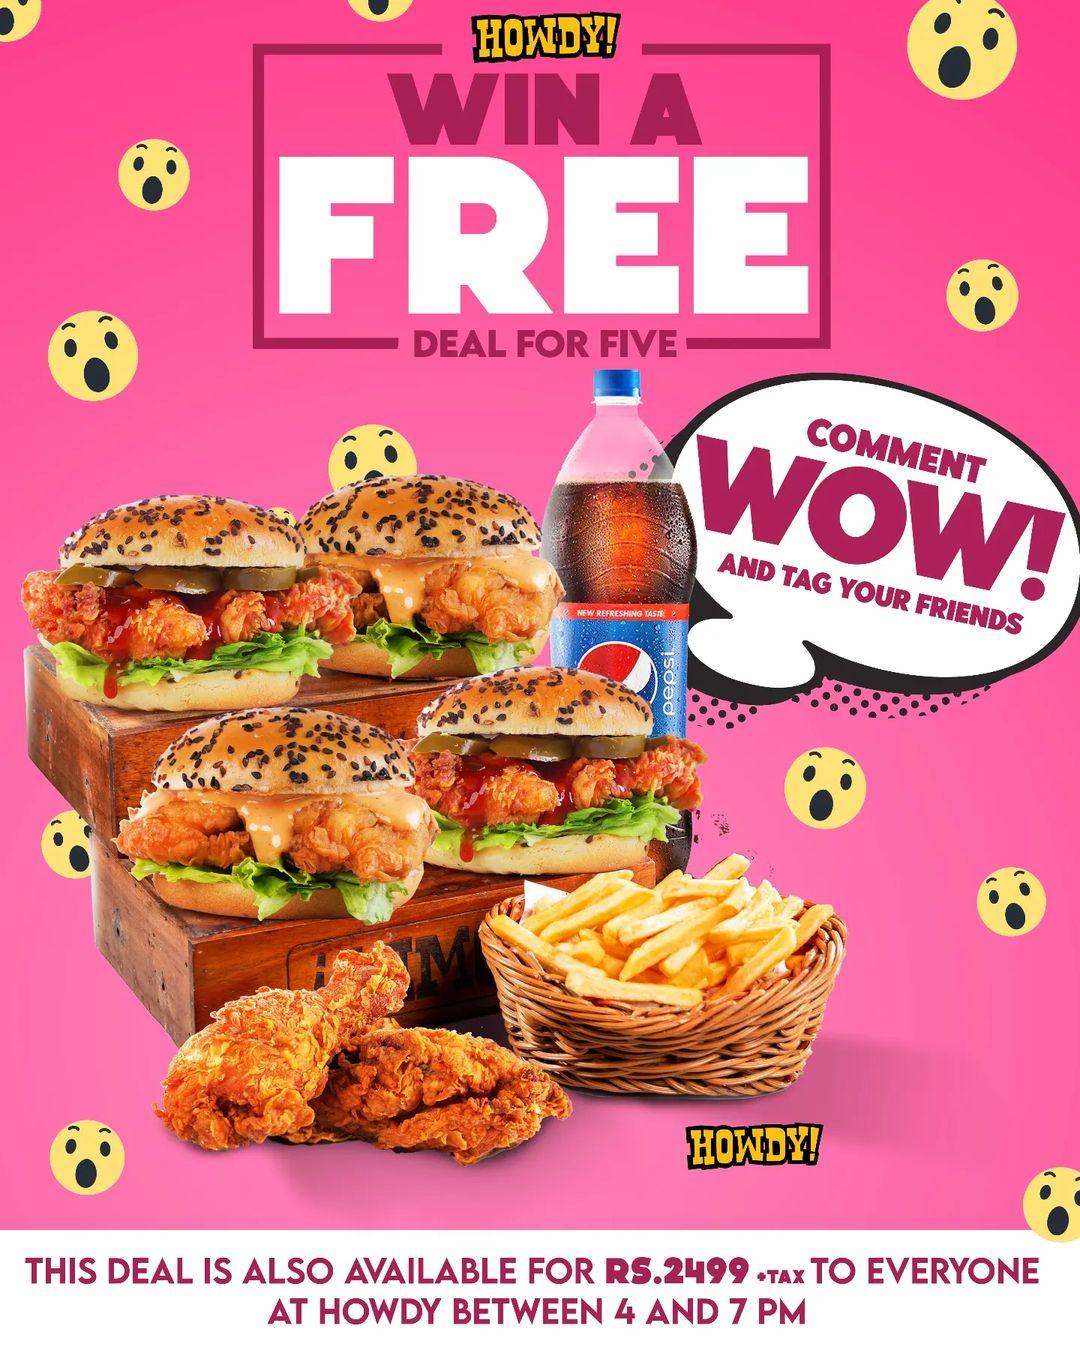 class="content__text"
 Comment WOW and tag your friends for the chance to win a FREE deal for 5 pardners! It's a truly wowdy giveaway so don't miss out!

 #Howdy #howdypakistan #howdyislamabad #bestburgersintown #islamabadfood #lahorefoodies #Pakistan #Islamabad #Lahore #itshappyning #burgers #fries #foodlovers #foodstagram #delivery #DealsAndDiscounts #deals #HowdyApp 
 